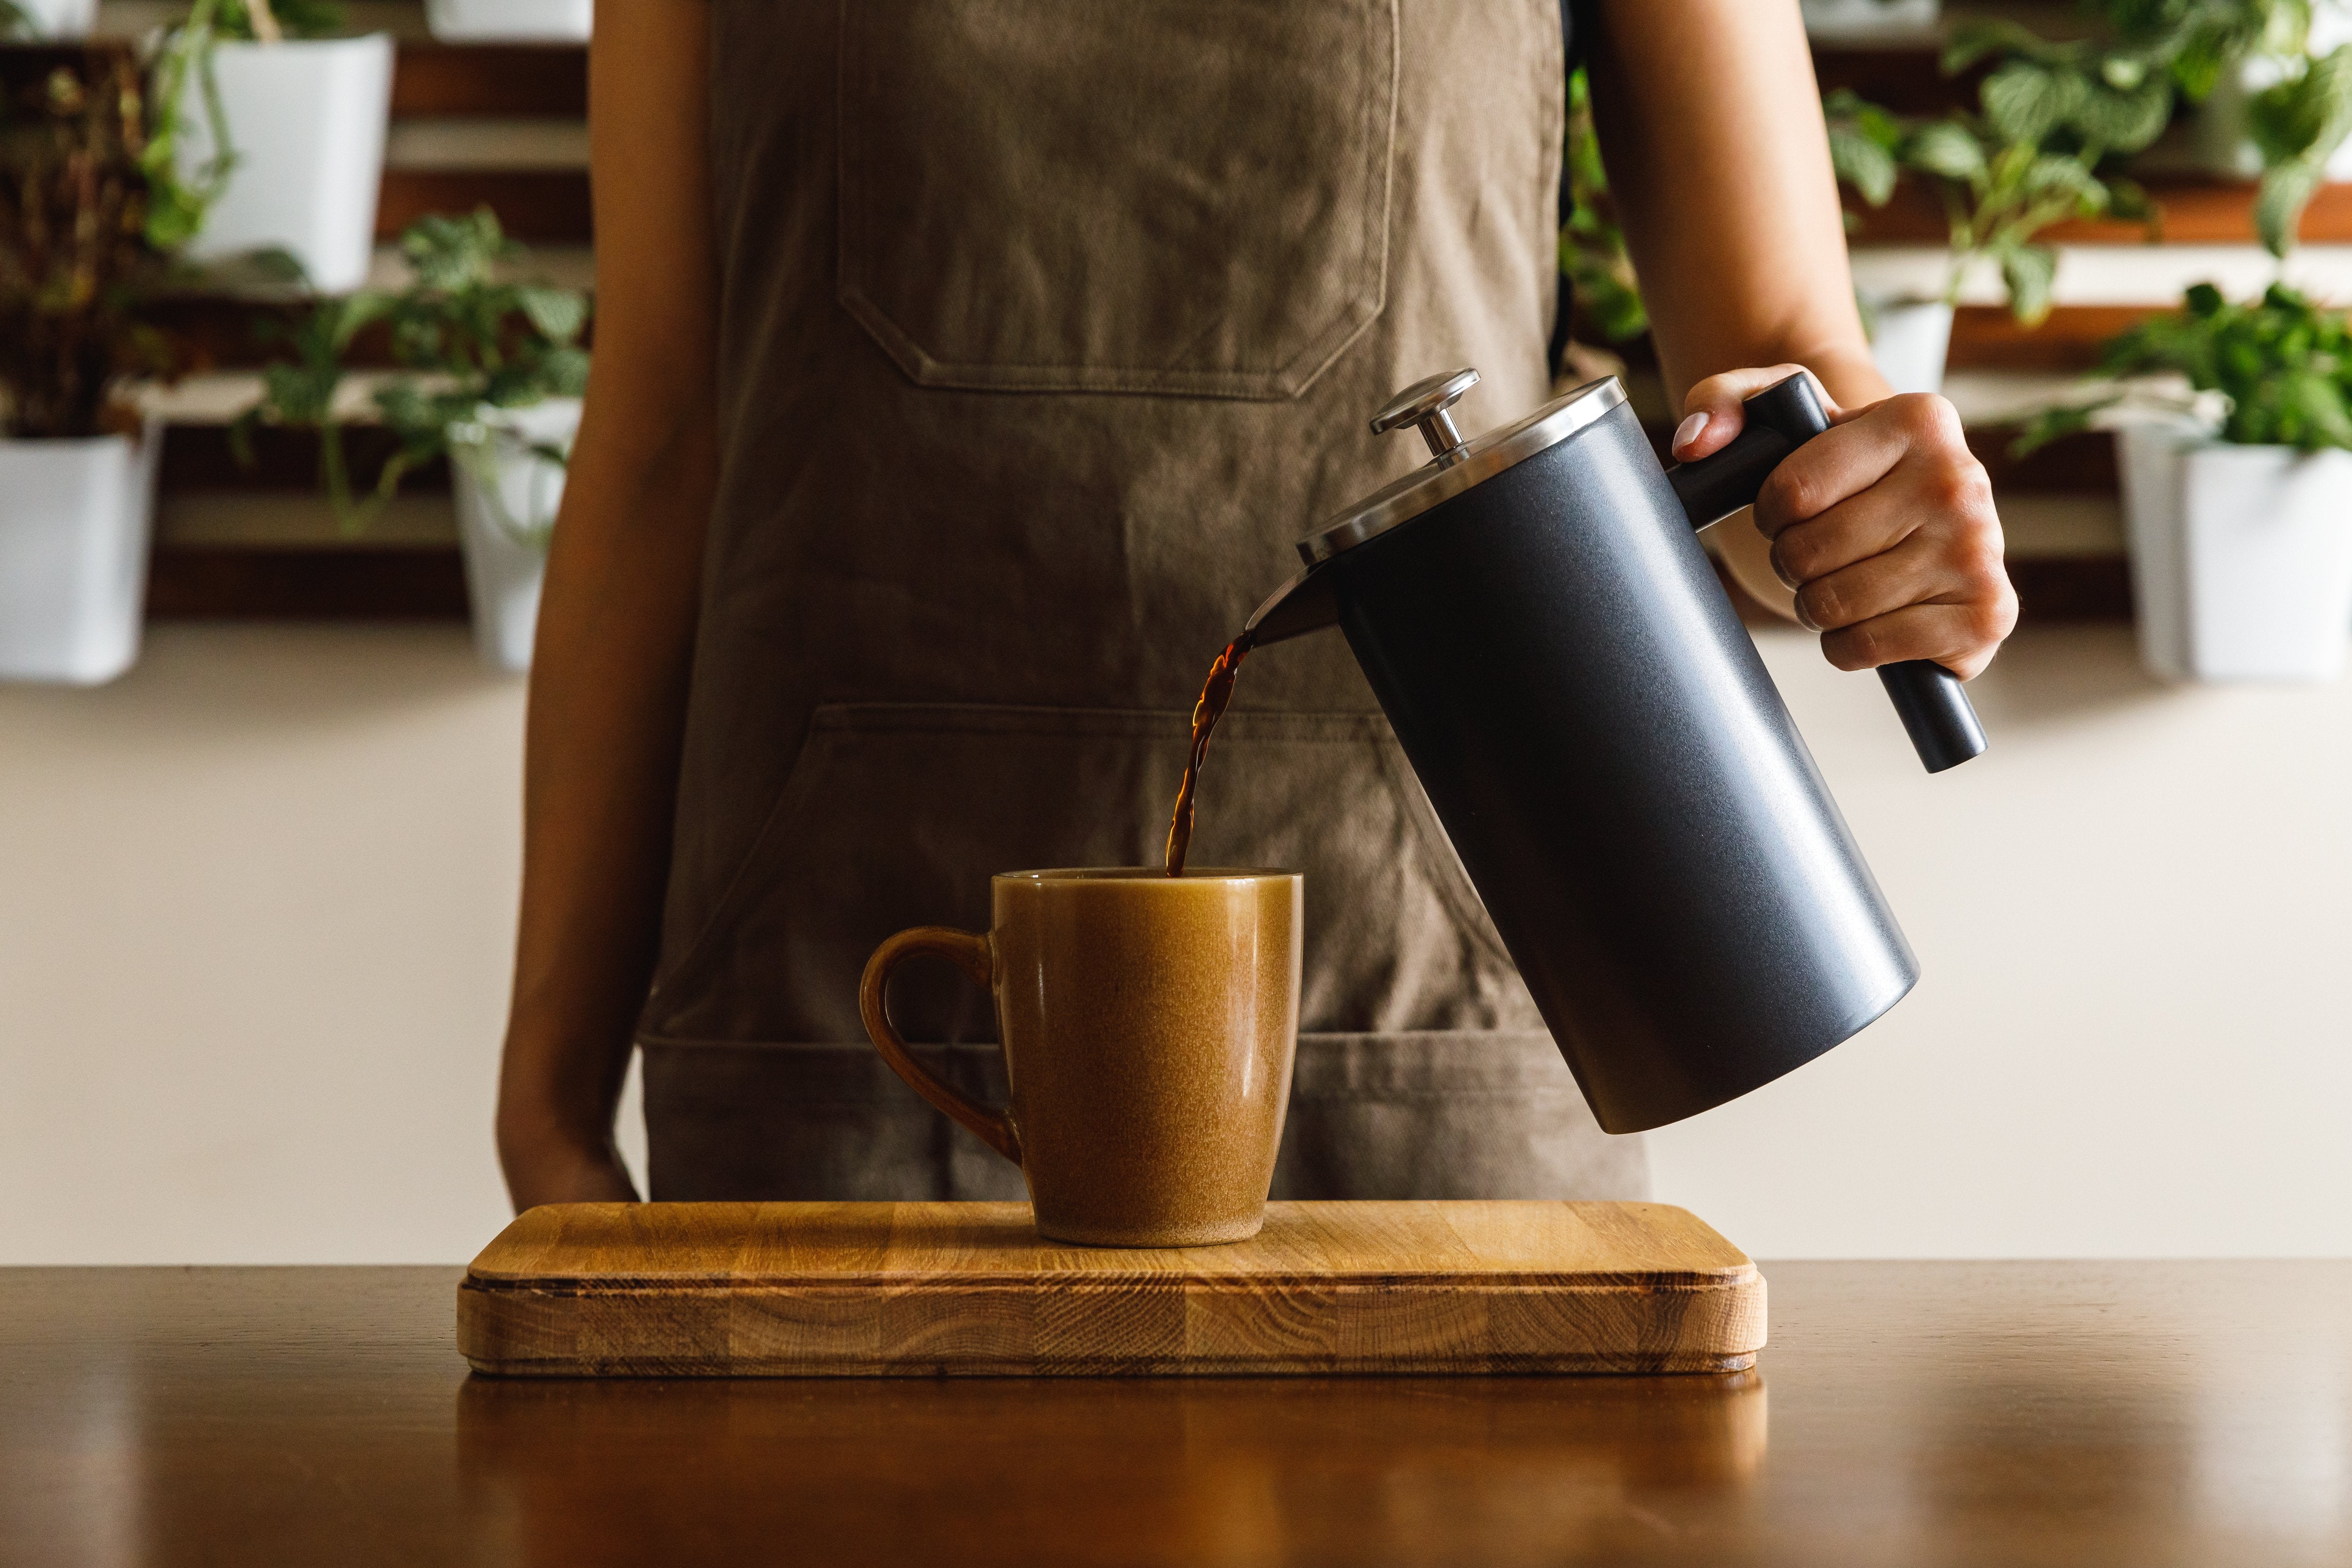 French Press: Best How-To Tips, Techniques, and Creative Uses